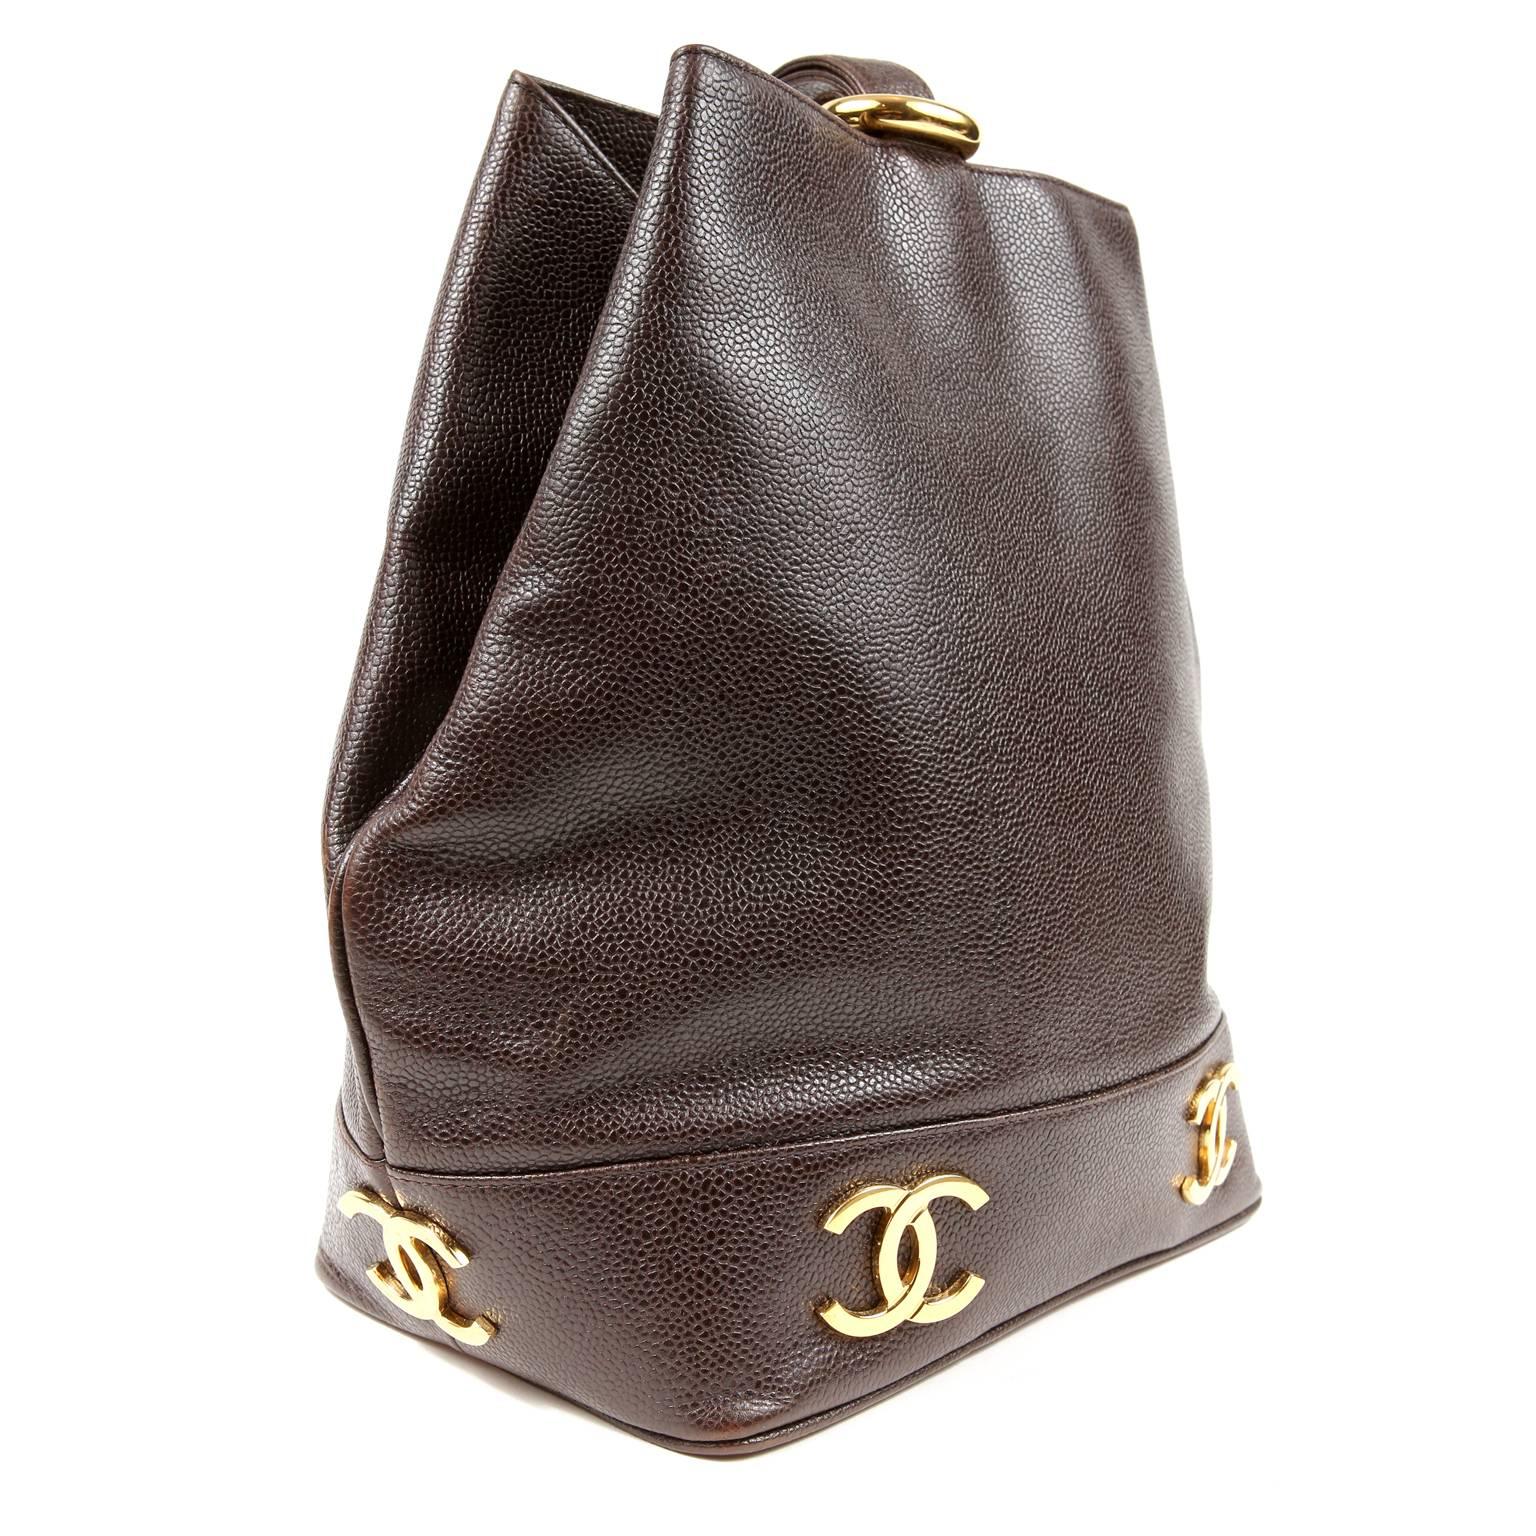 Chanel Brown Caviar Leather Sling Bag- Excellent Plus Condition
  The sporty vintage style is right on track with the current bucket bag craze. 

Structured bucket style bag is designed in durable brown caviar leather.  Gold tone interlocking CC